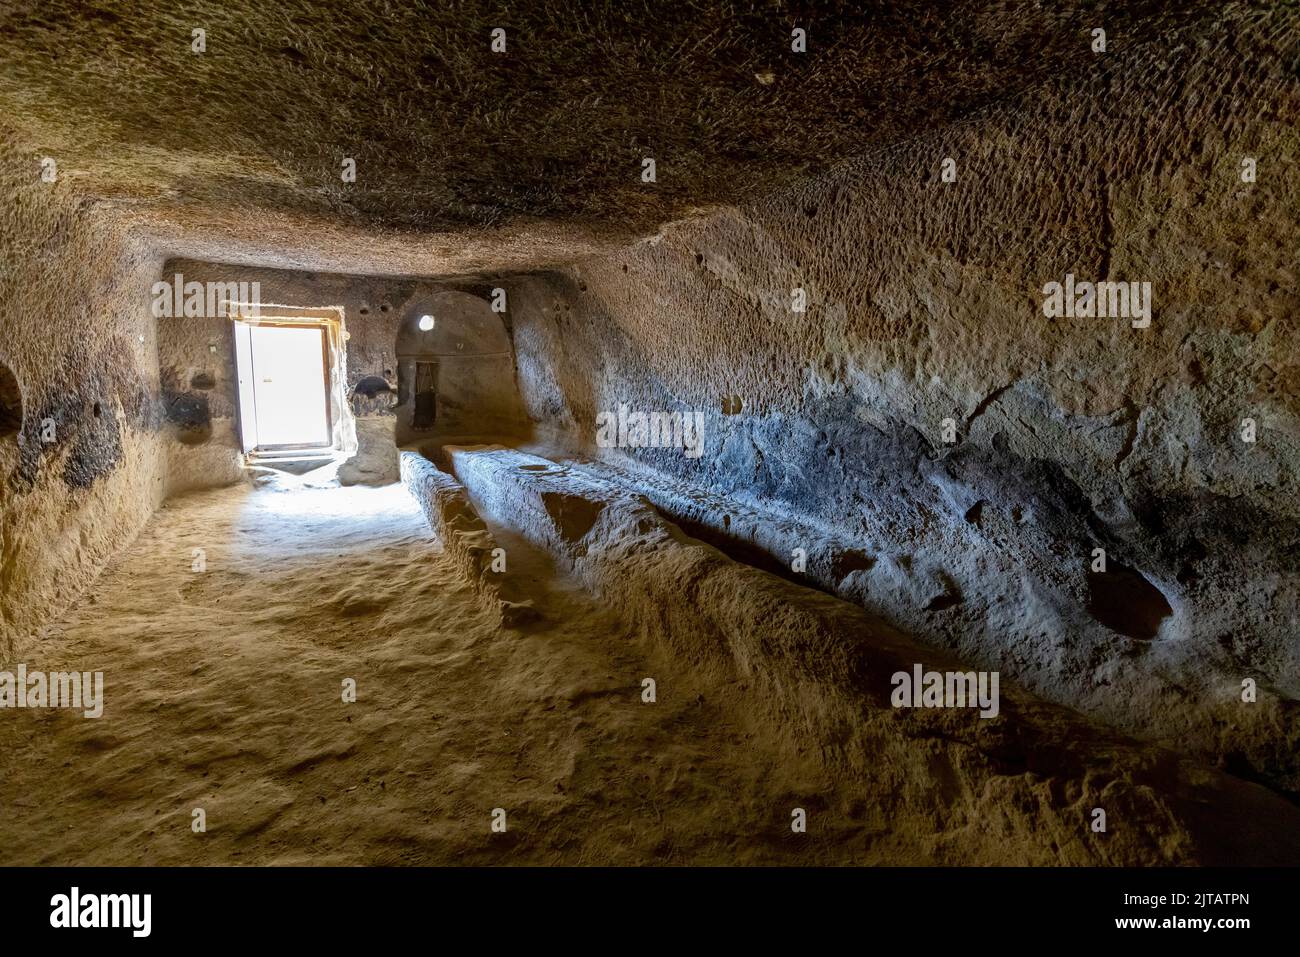 open air museum in goreme turkey, detail of an interior room carved into the tuff. Stock Photo